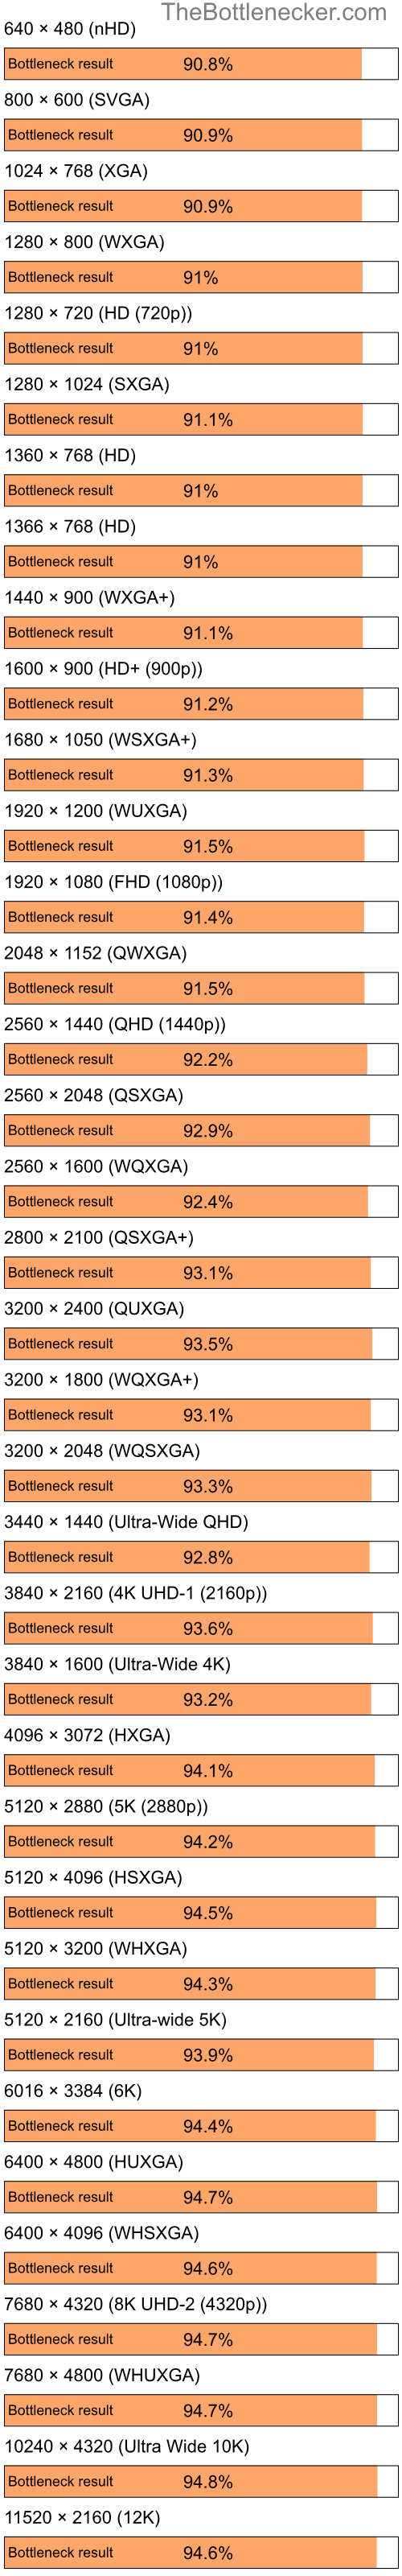 Bottleneck results by resolution for Intel Atom N270 and AMD Radeon 9200 in7 Days to Die